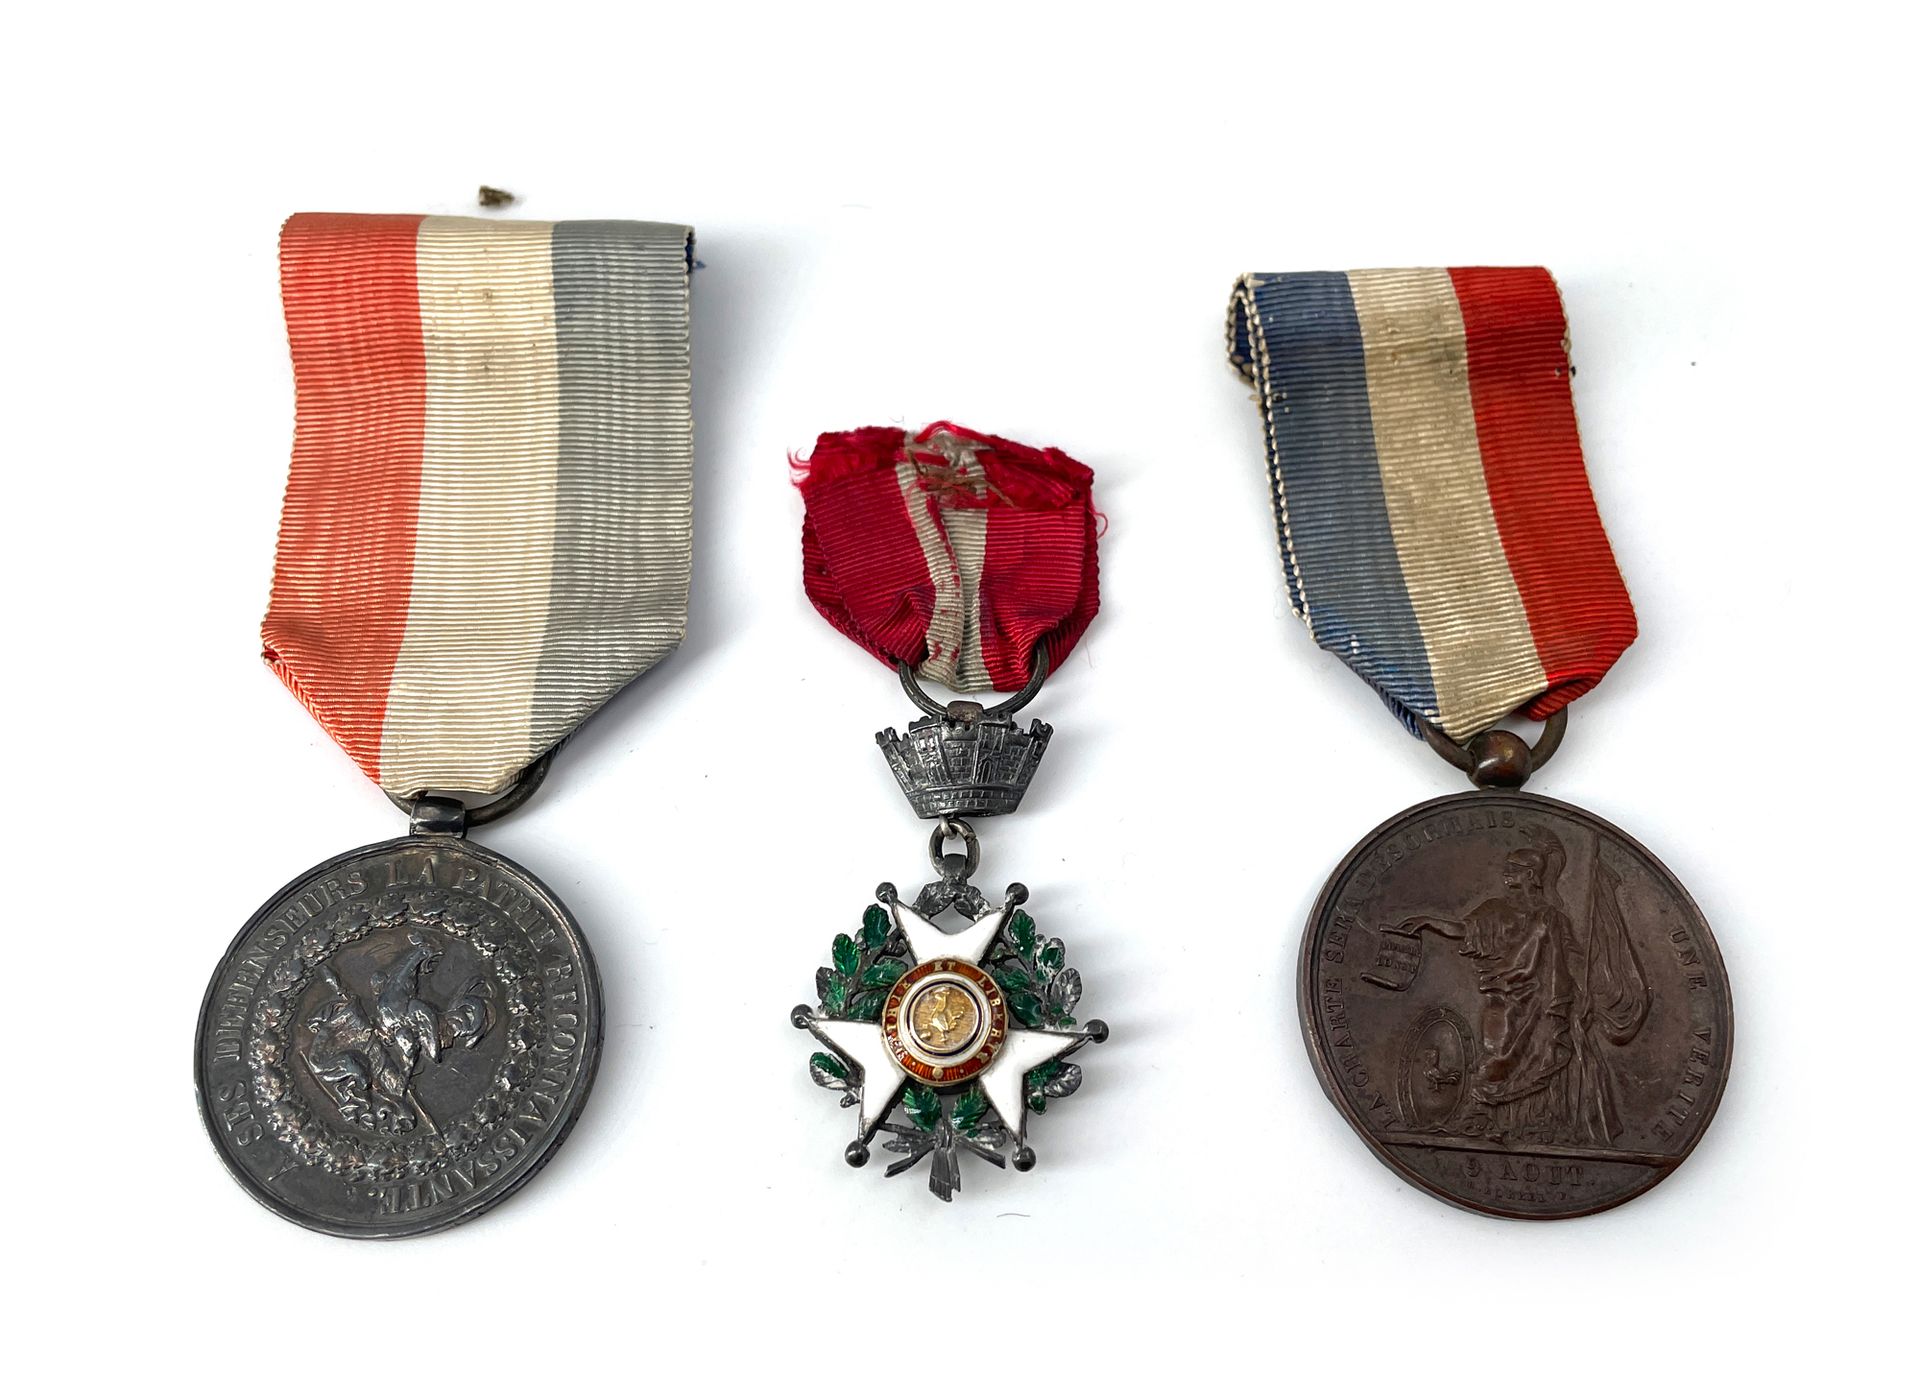 Null FRANCE MONARCHY OF JULY Three medals:
- Cross of July in reduction. Silver,&hellip;